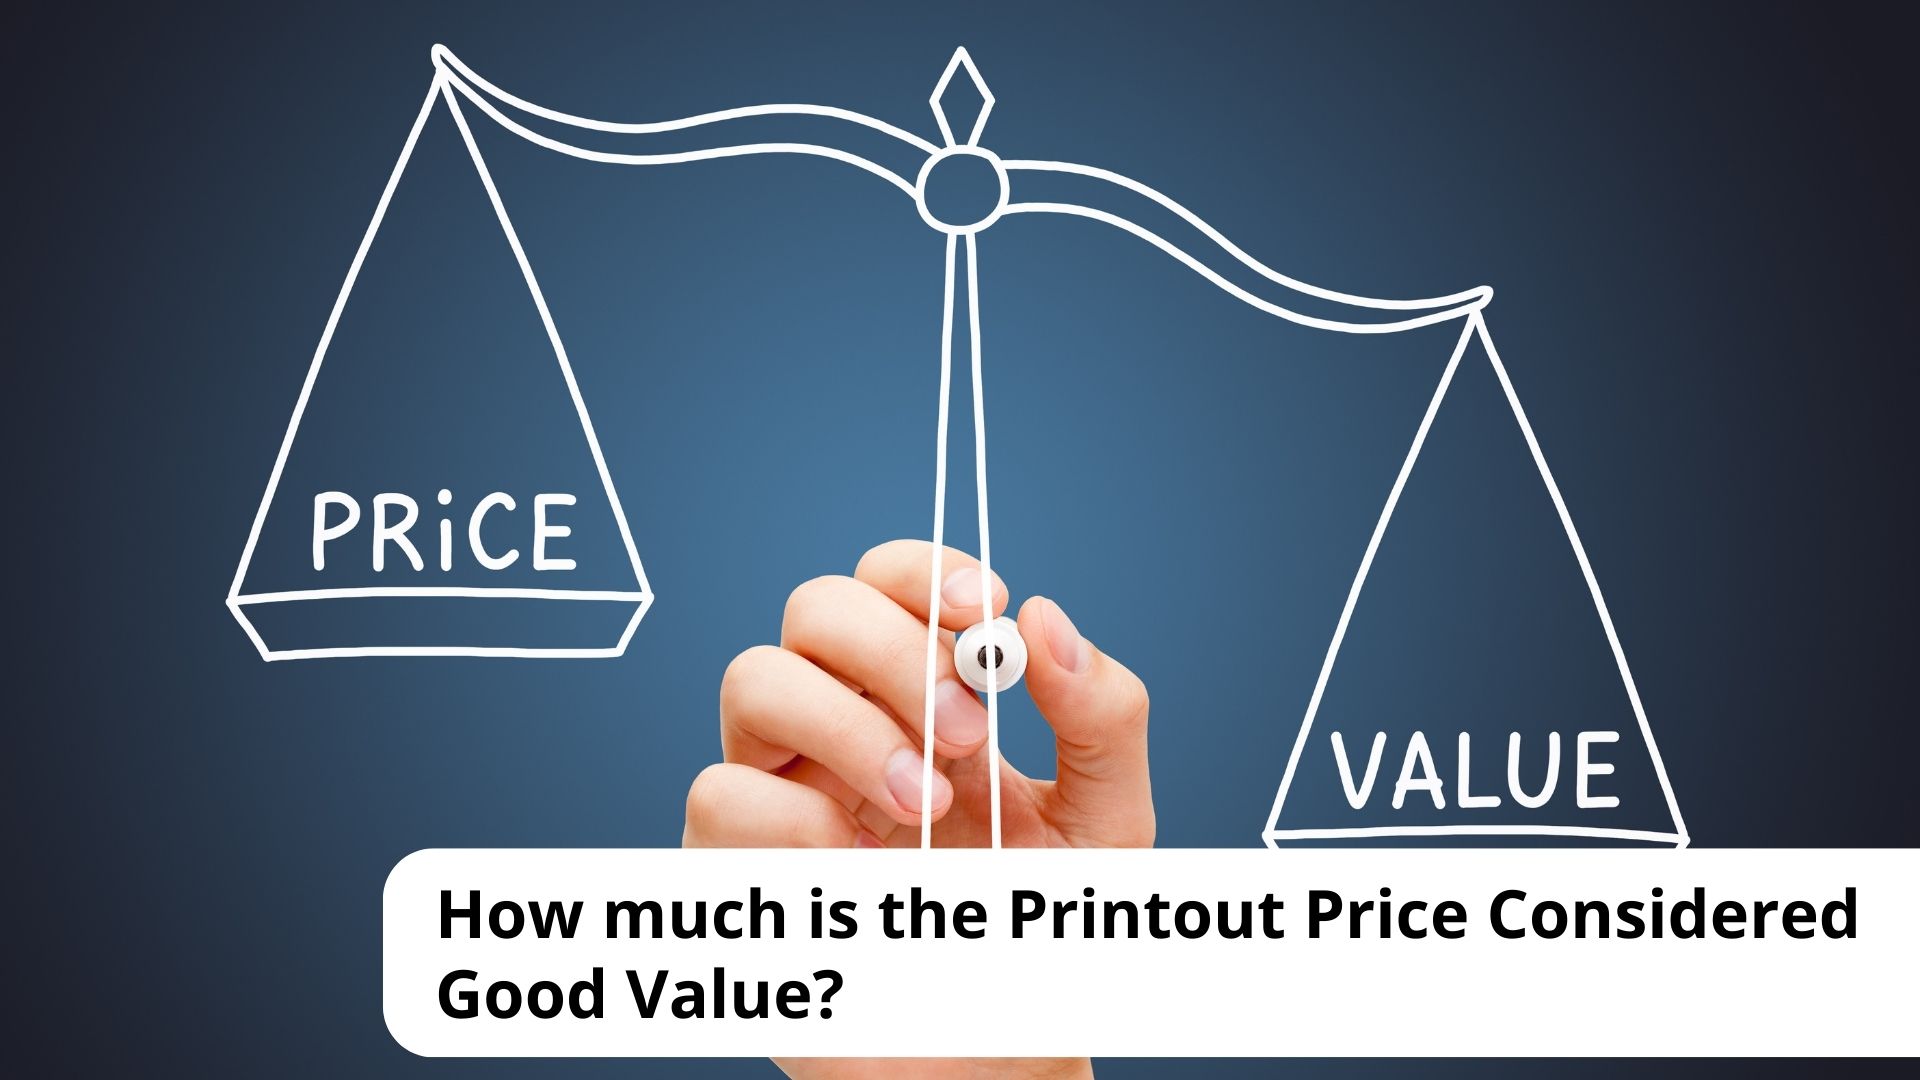 How much is the Printout Price Considered Good Value